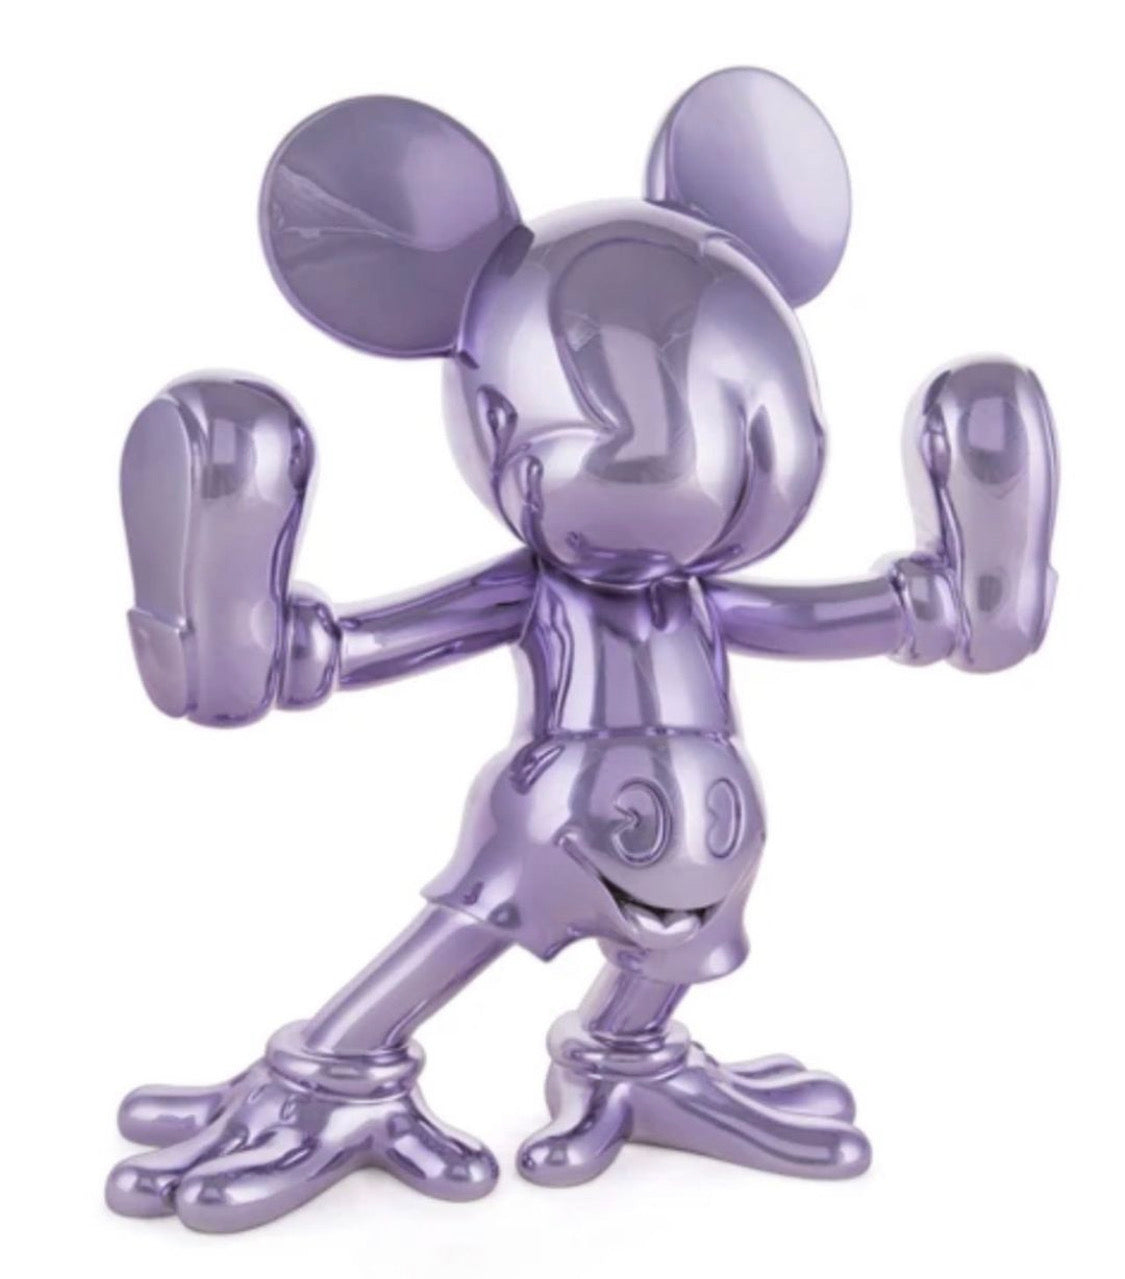 Freaky Mouse, Edition 1/5 (2017)